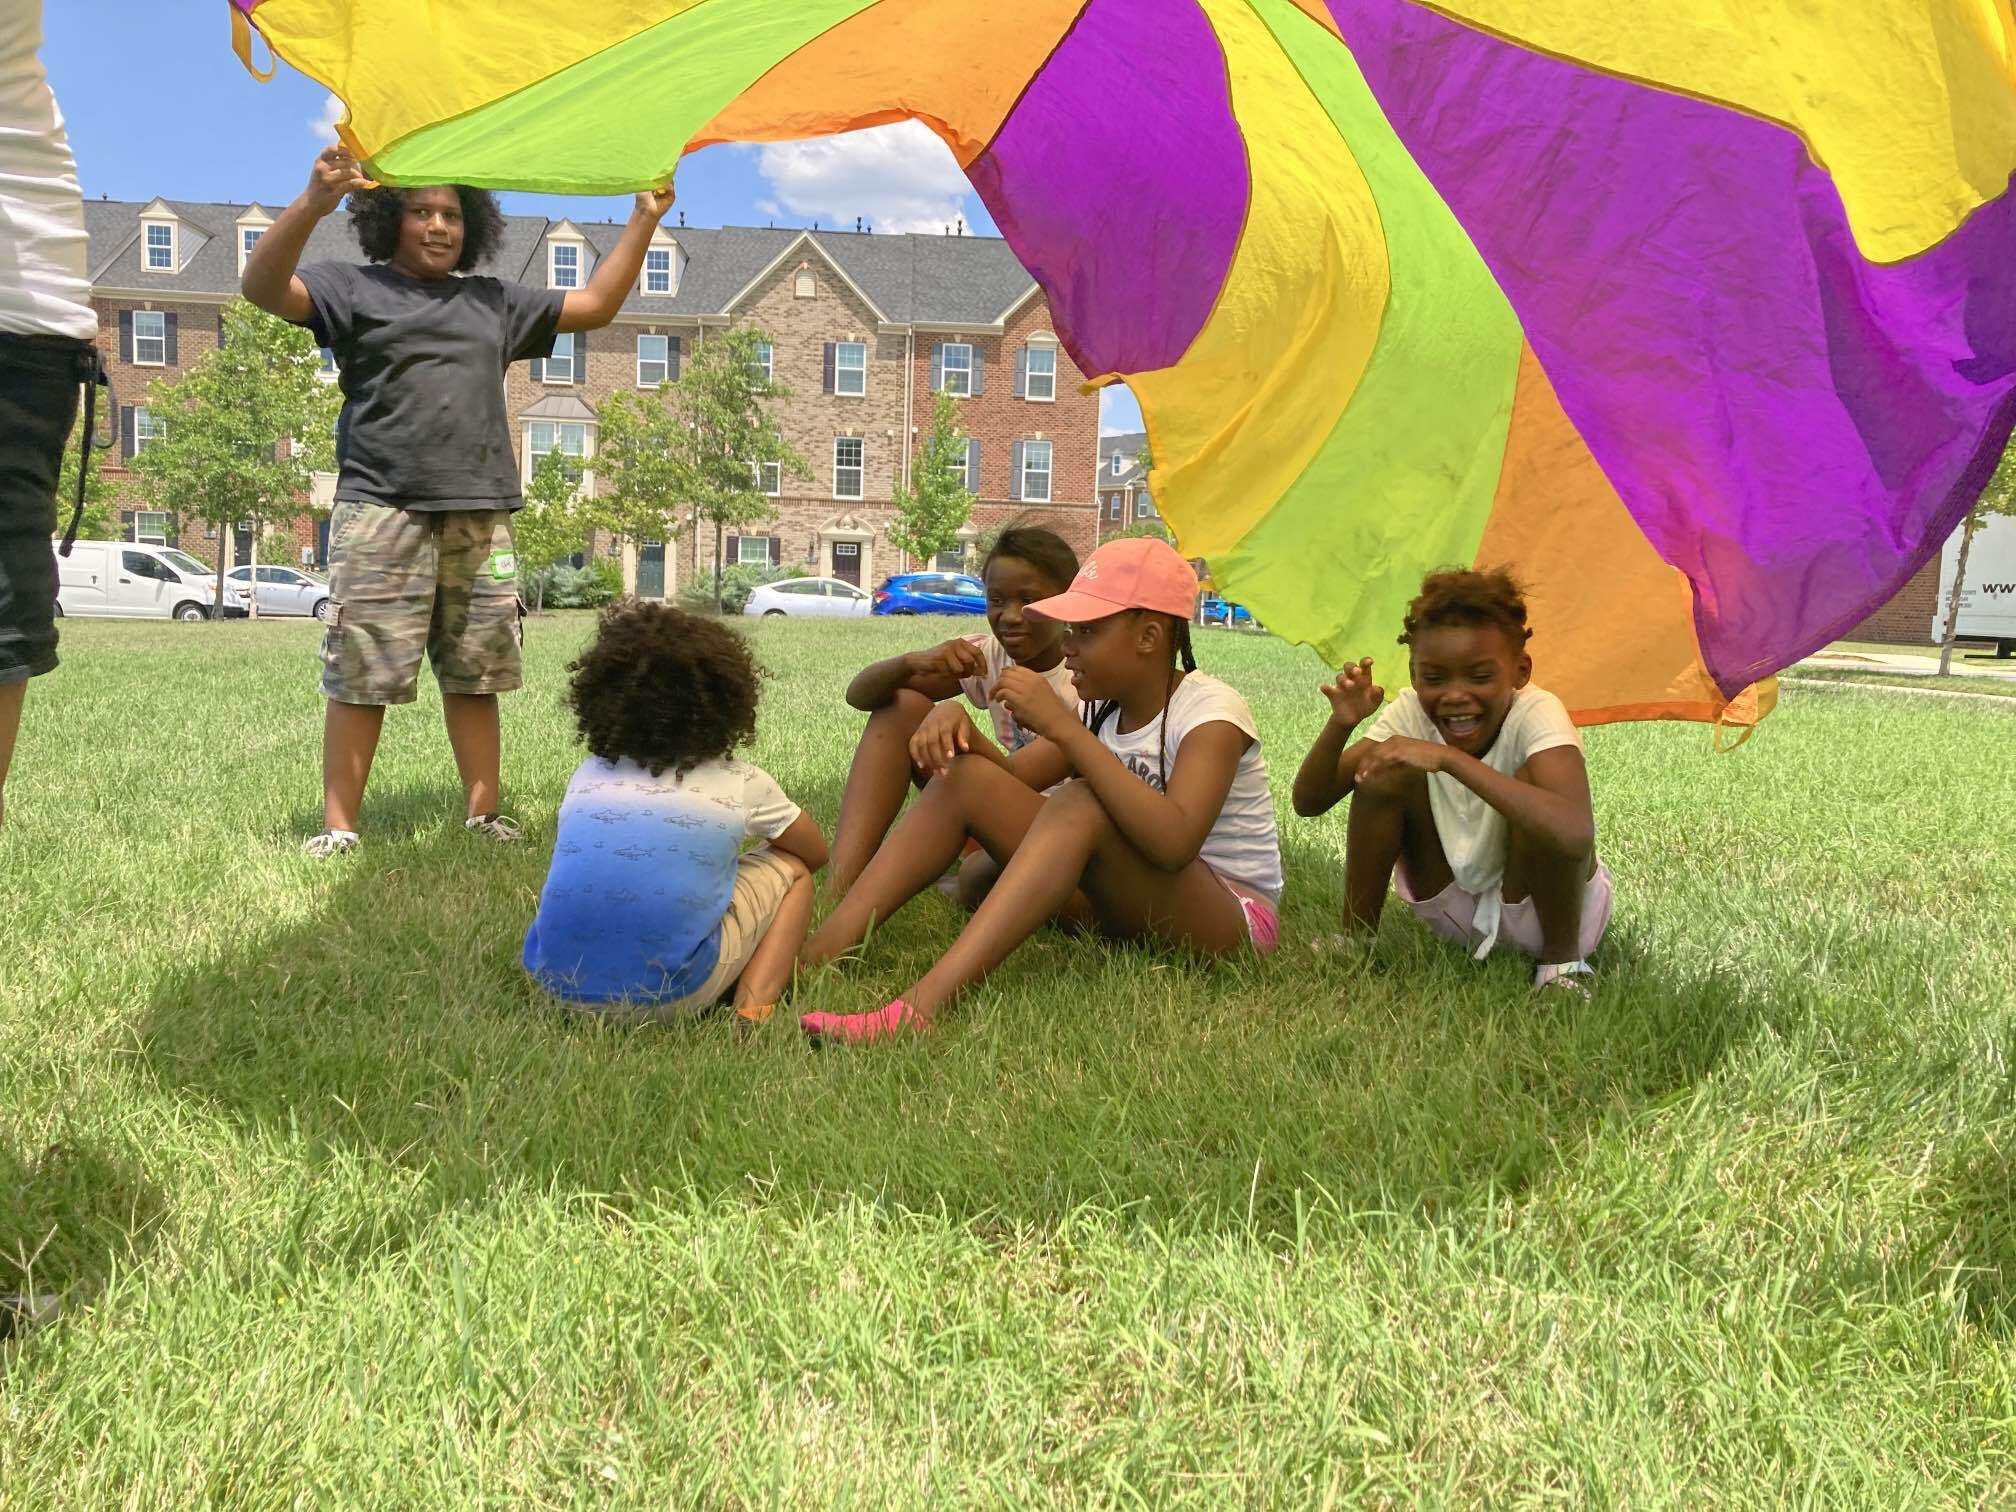 Children on a grass field sitting under a rainbow parachute while another child lifts it over their heads.